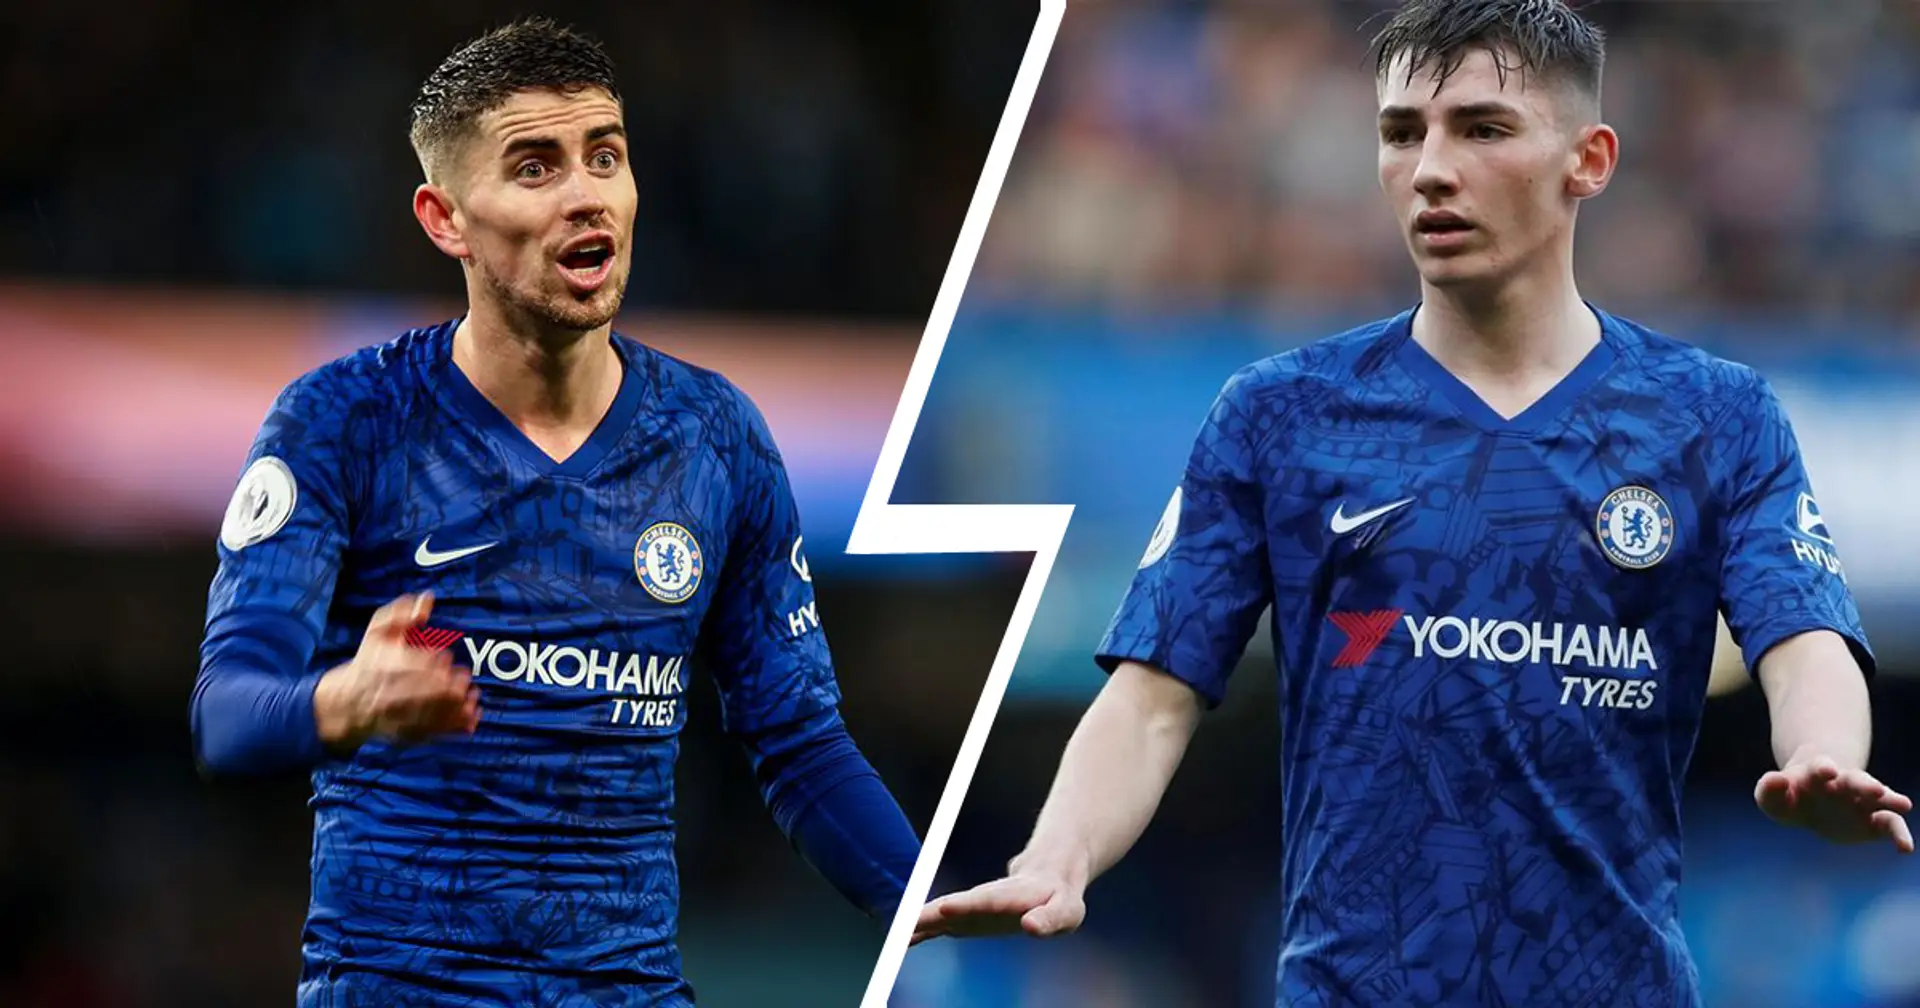 Evening Standard's James Olley expects Gilmour to push Jorginho out of starting XI